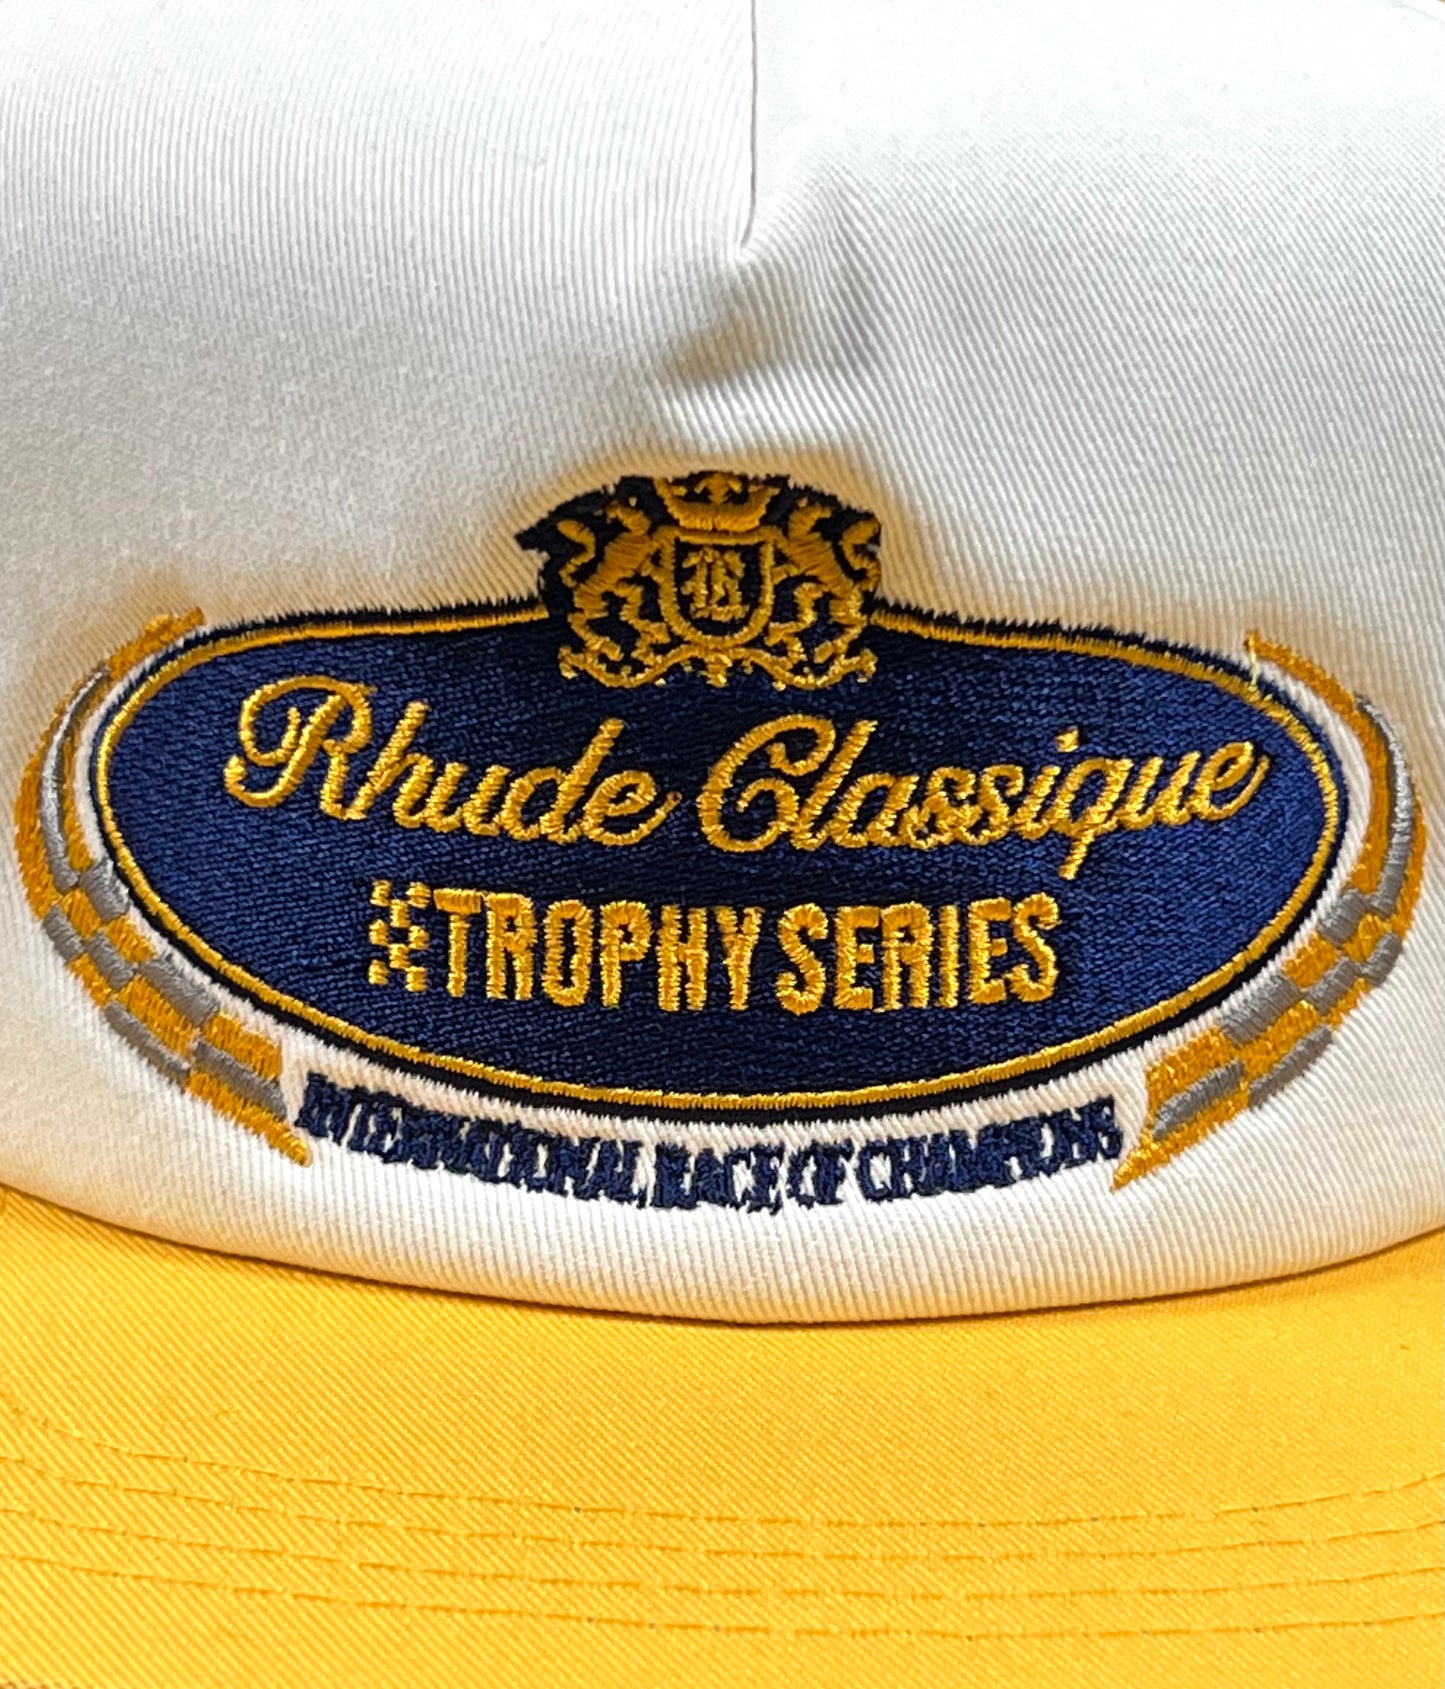 A hat with an adjustable strapback and embroidered branding that says Rhude Trophy Series.